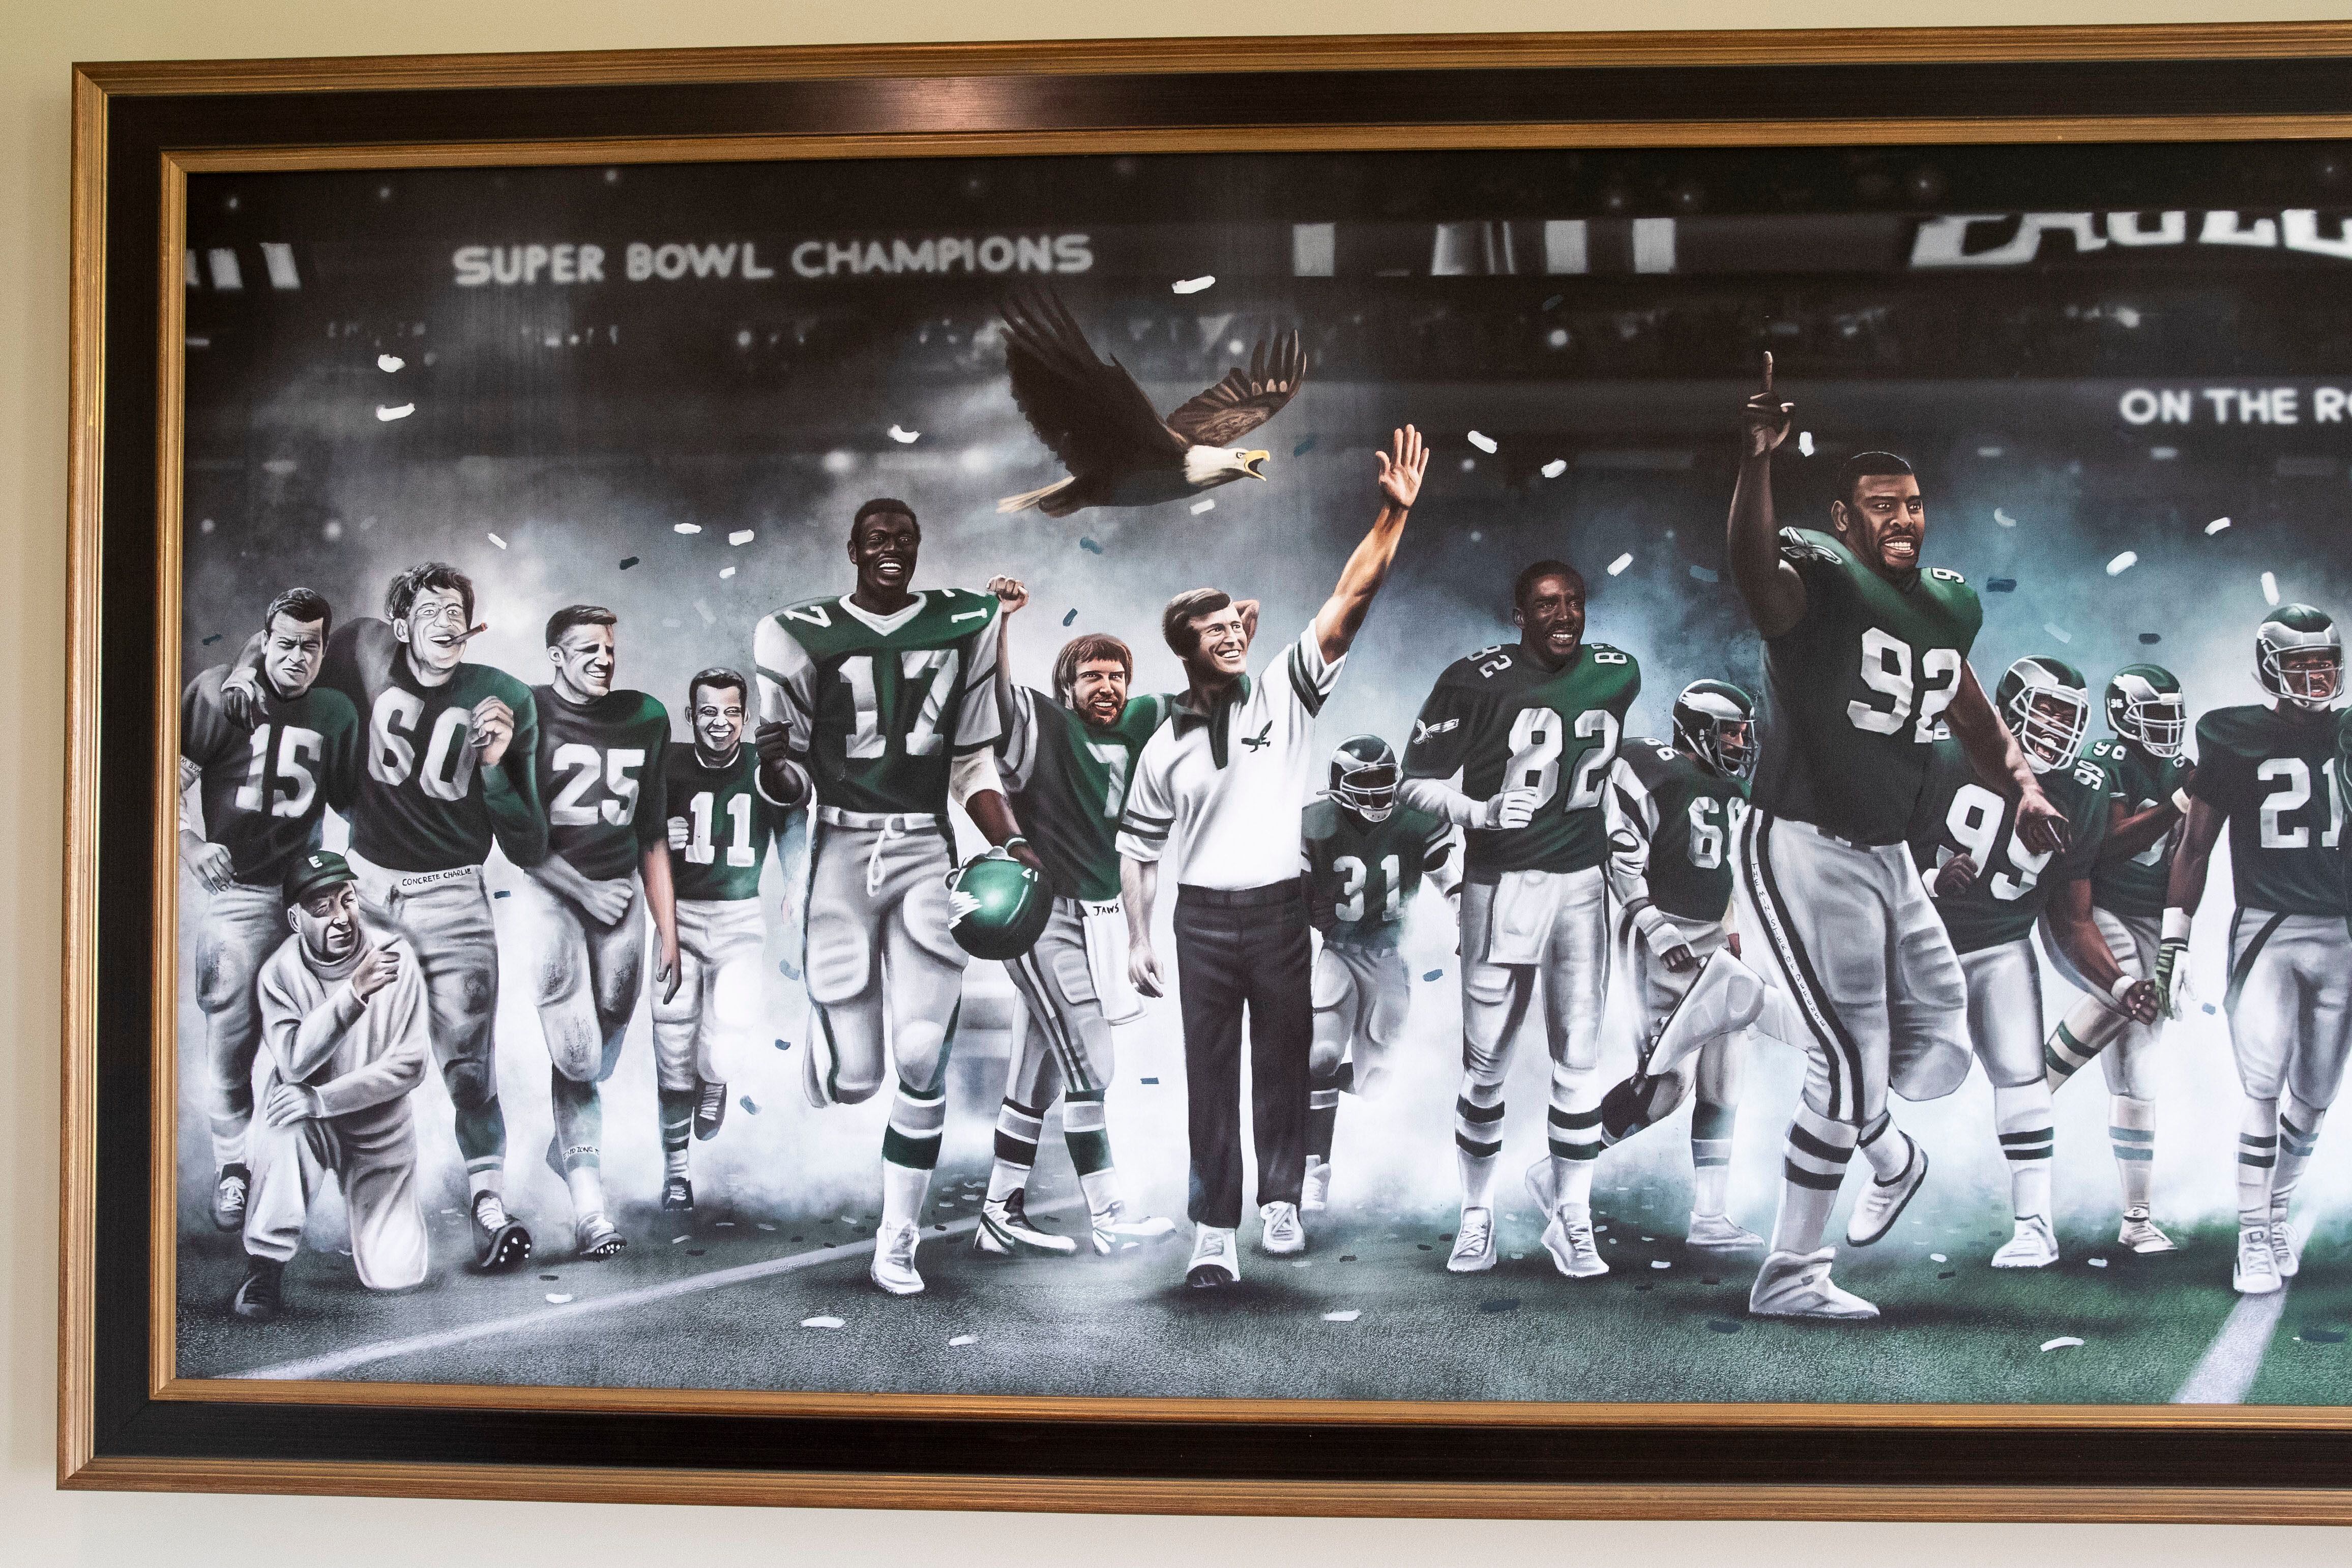 Eagles fans (one is an artist) memorialize Super Bowl LII victory